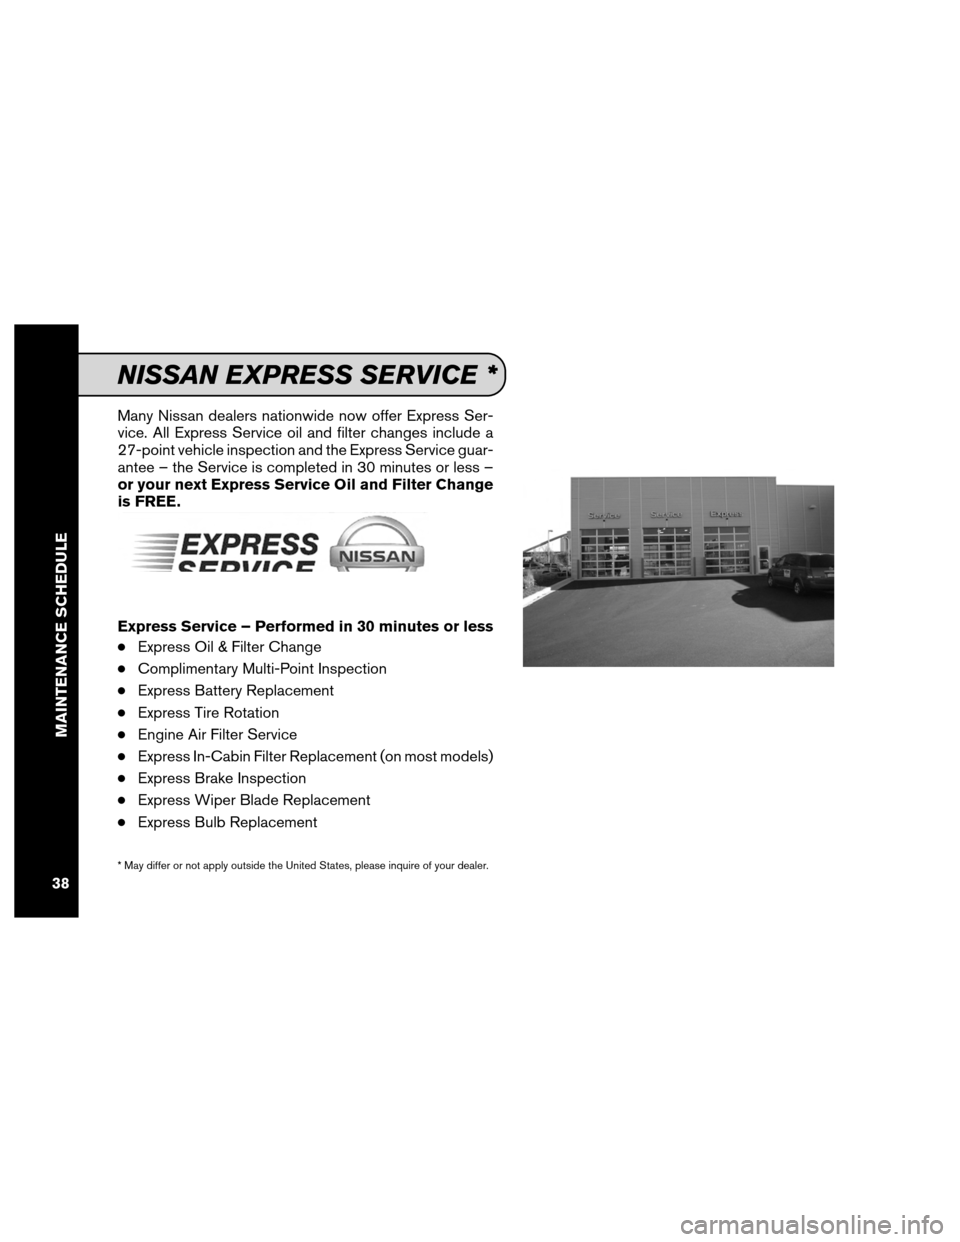 NISSAN MAXIMA 2012 A35 / 7.G Service And Maintenance Guide Many Nissan dealers nationwide now offer Express Ser-
vice. All Express Service oil and filter changes include a
27-point vehicle inspection and the Express Service guar-
antee – the Service is comp